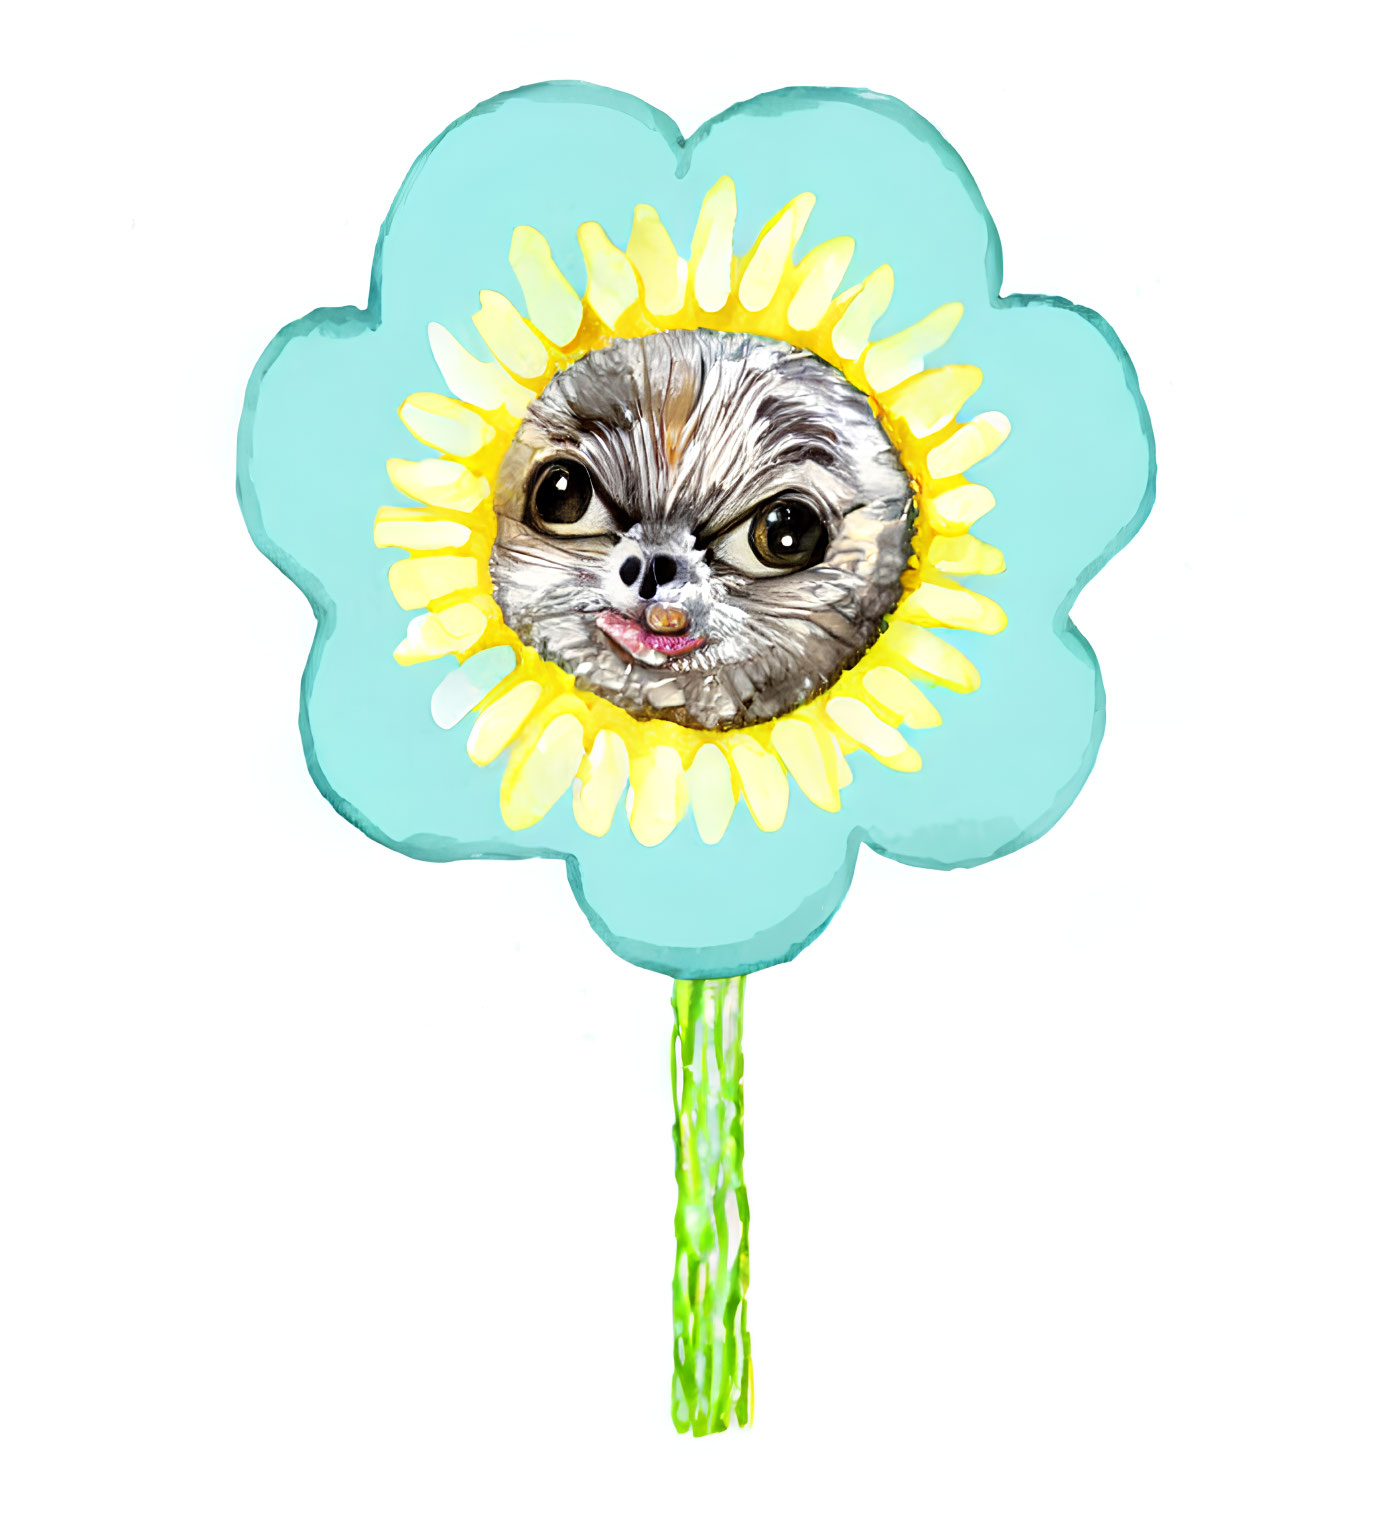 Illustration of sloth's face in blue flower with yellow center